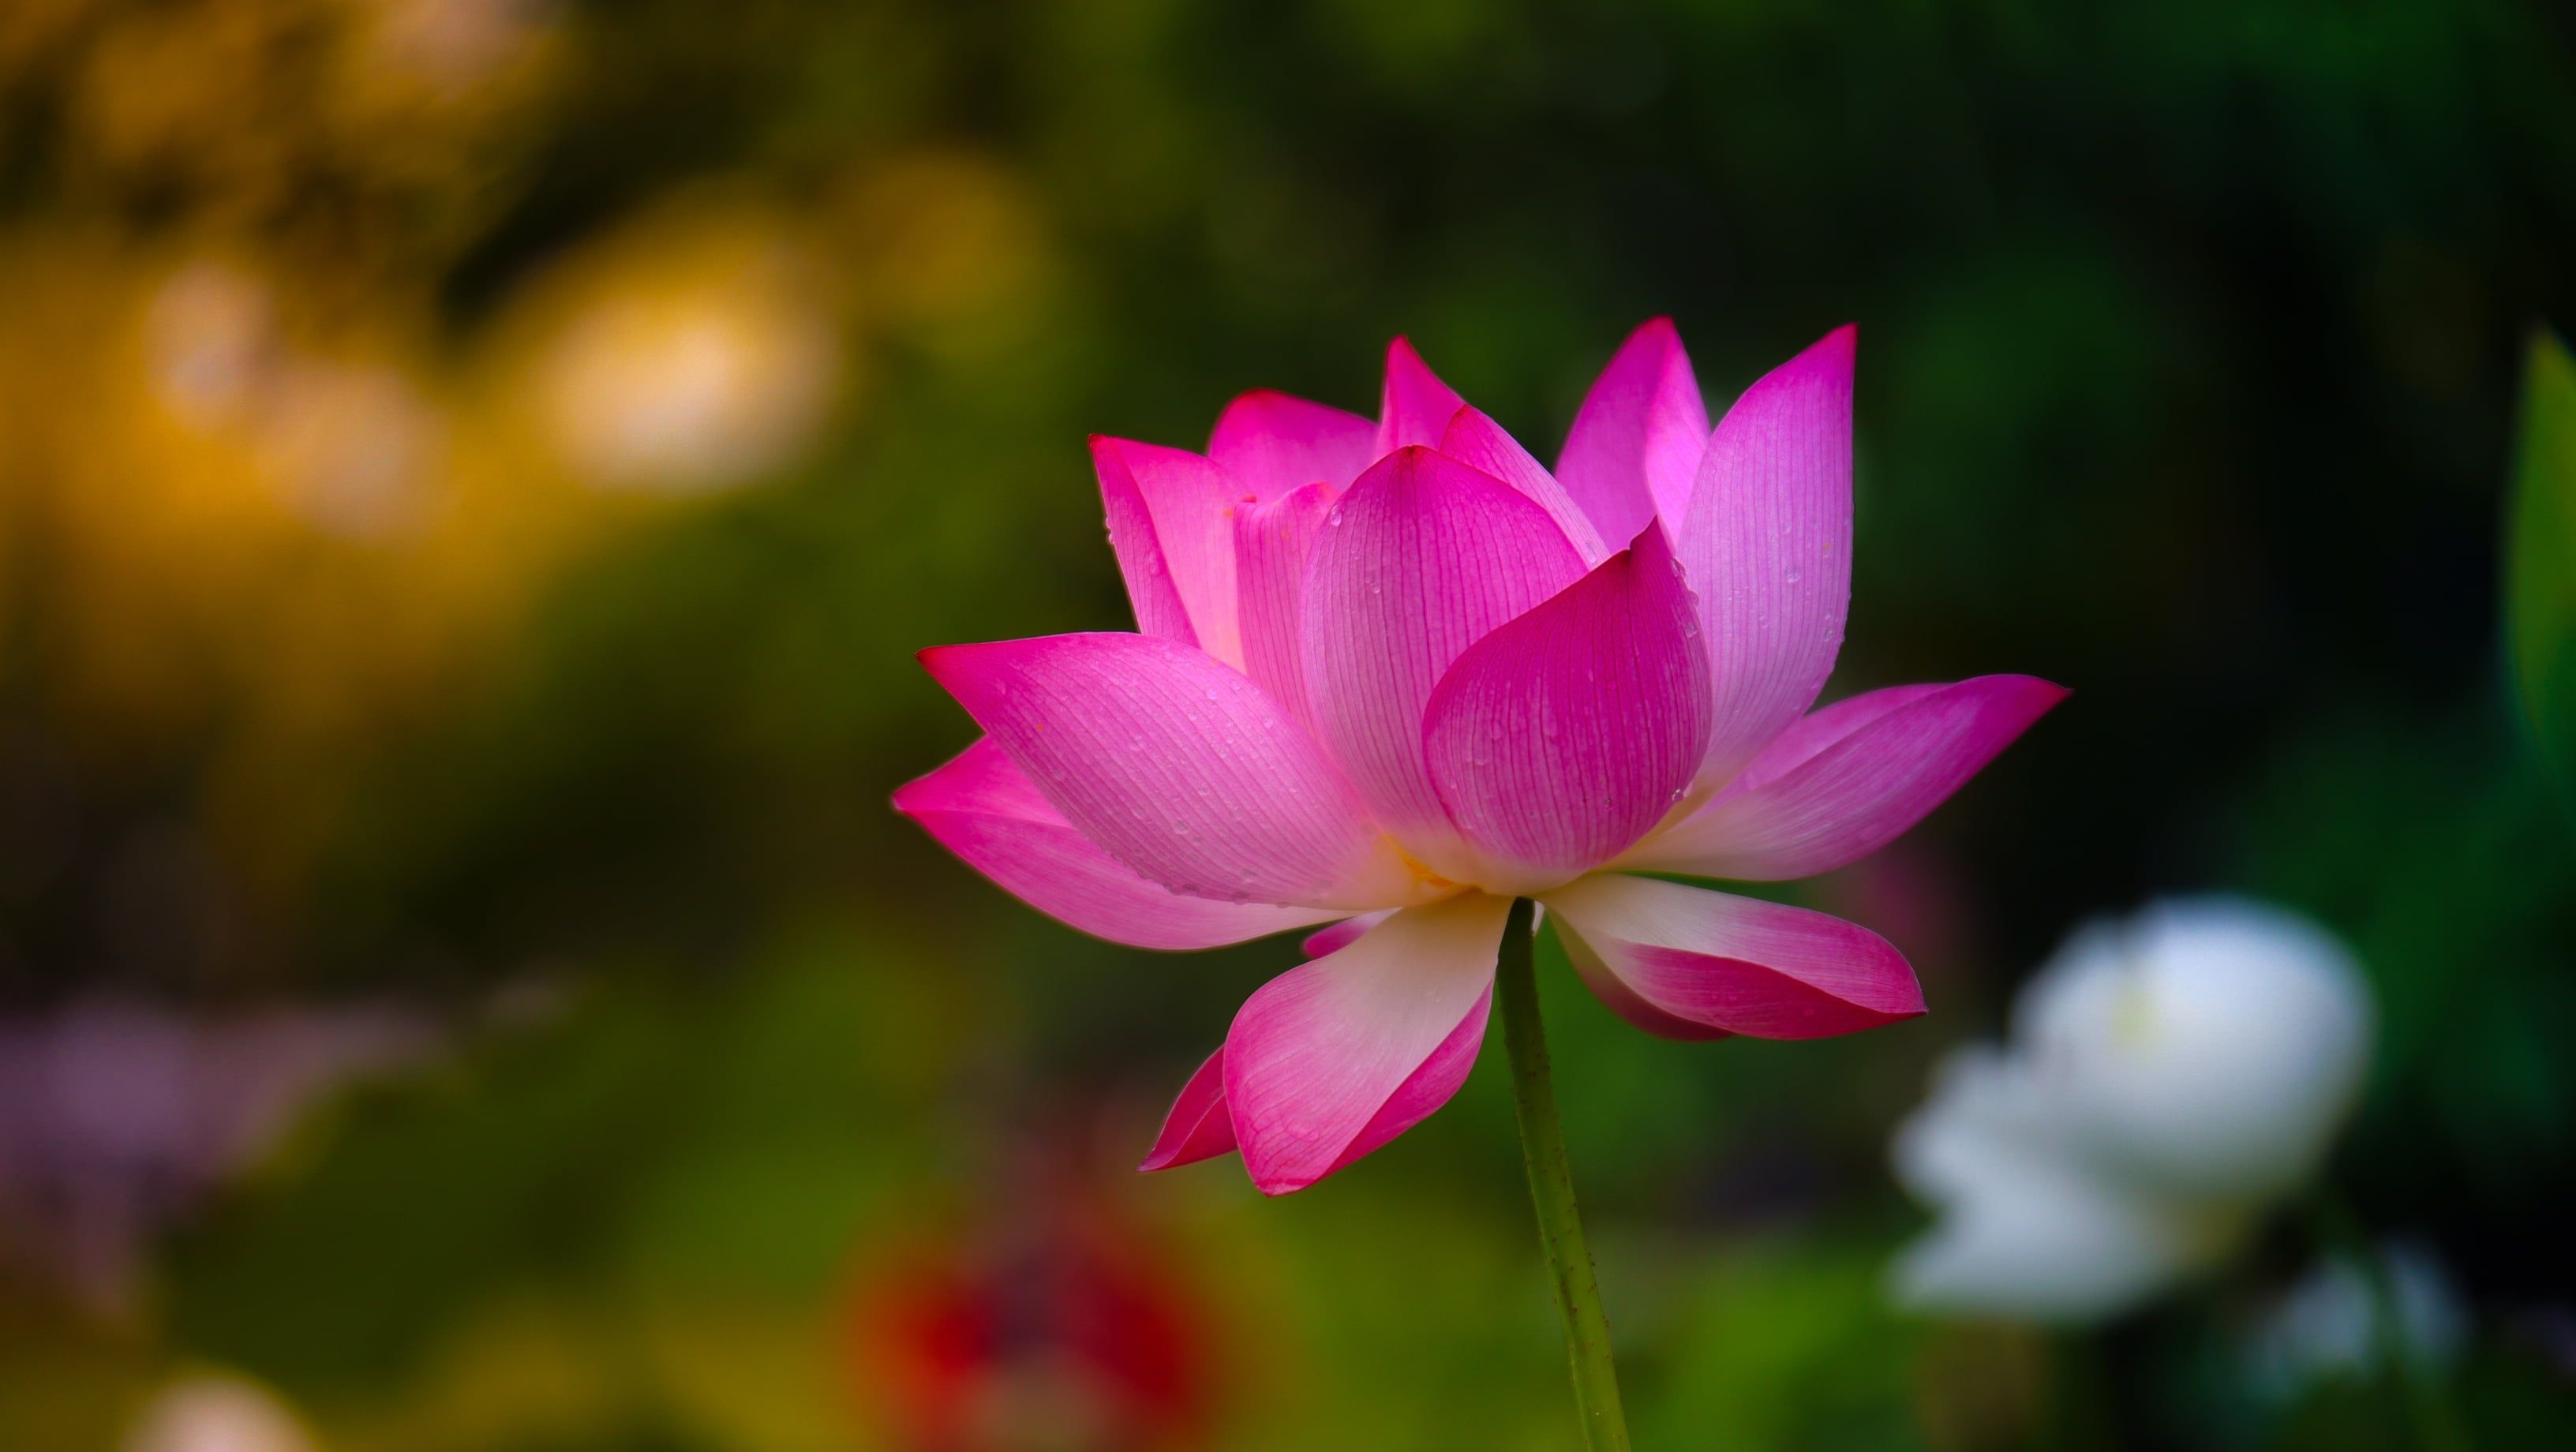 Pink lotus flower, Serenity in nature, Exquisite water lily, Vibrant pink color, 3270x1840 HD Desktop